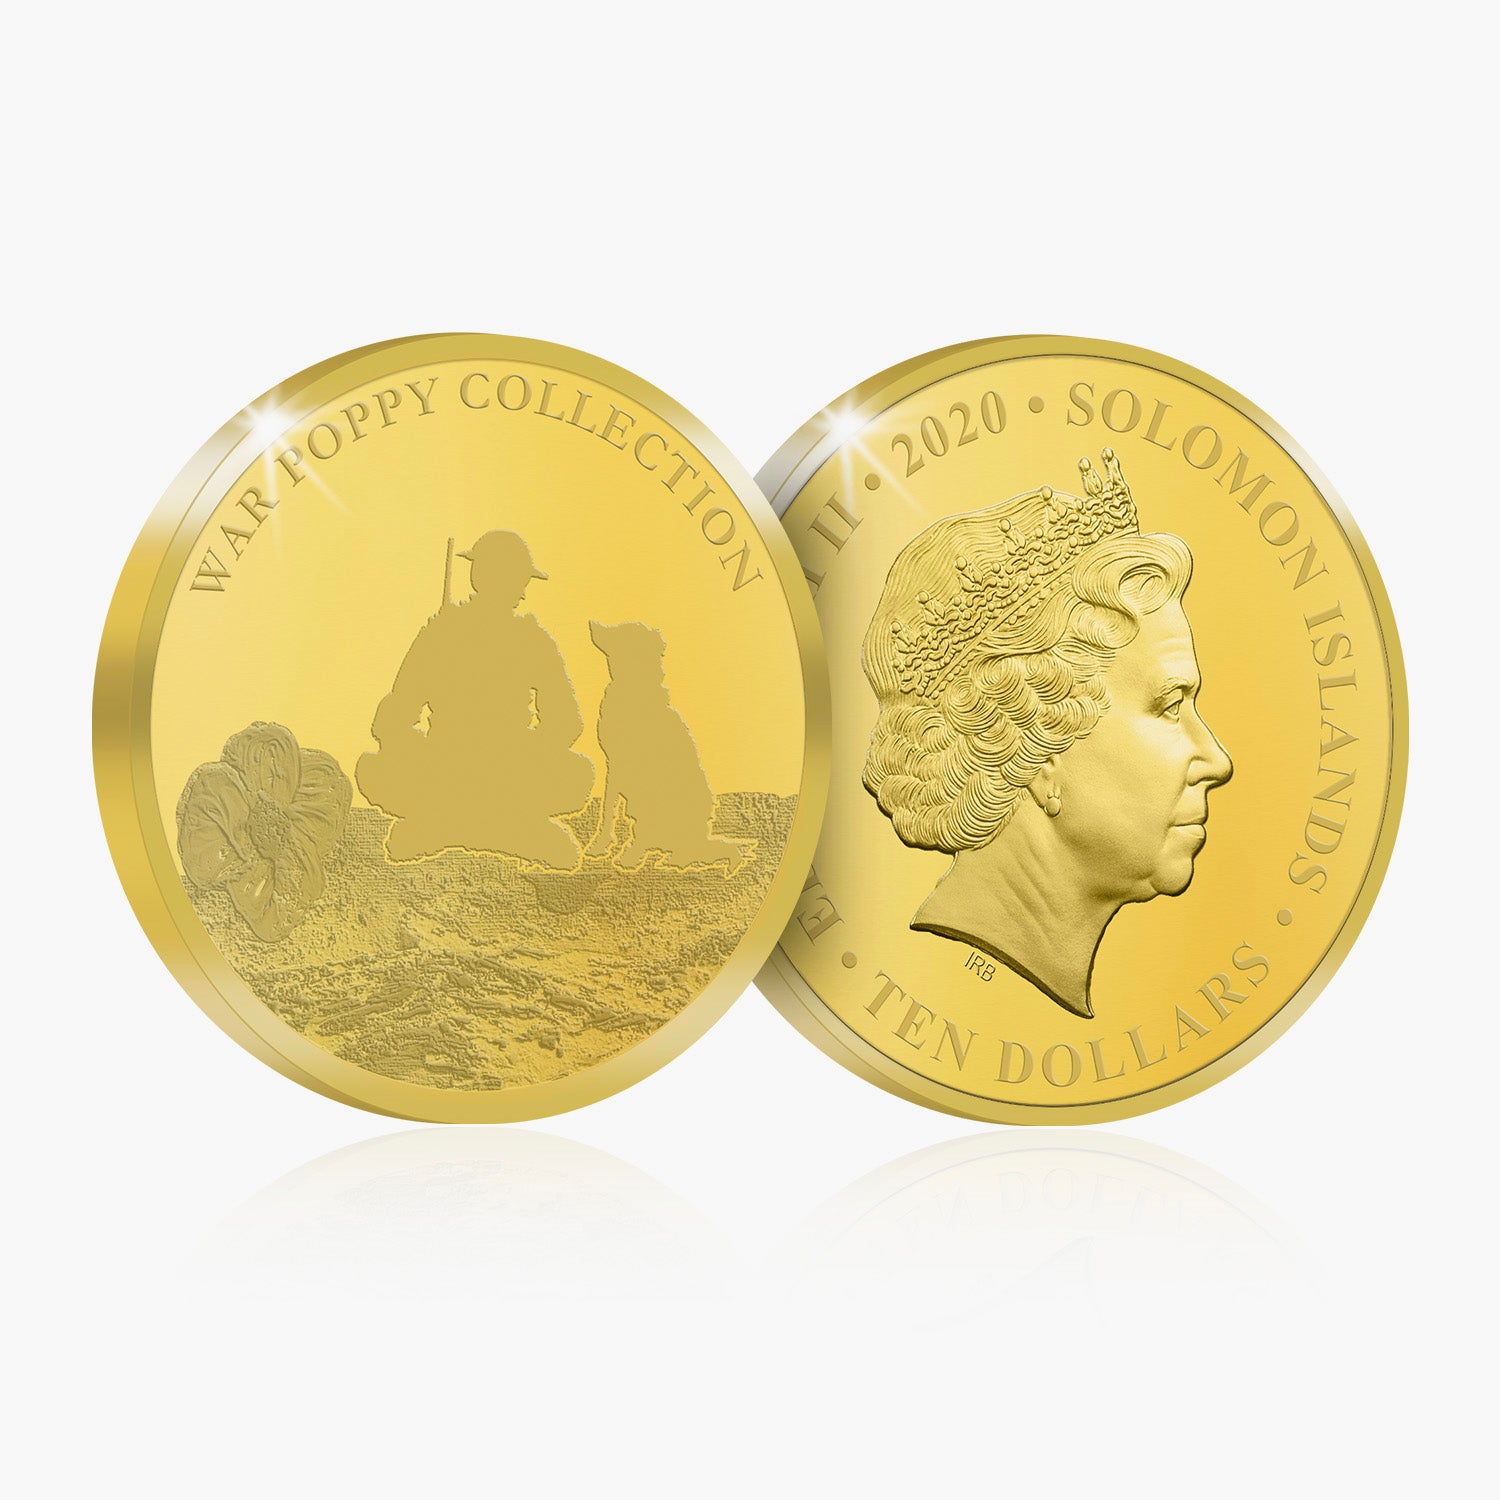 A Winter's Tale 11mm Gold Coin